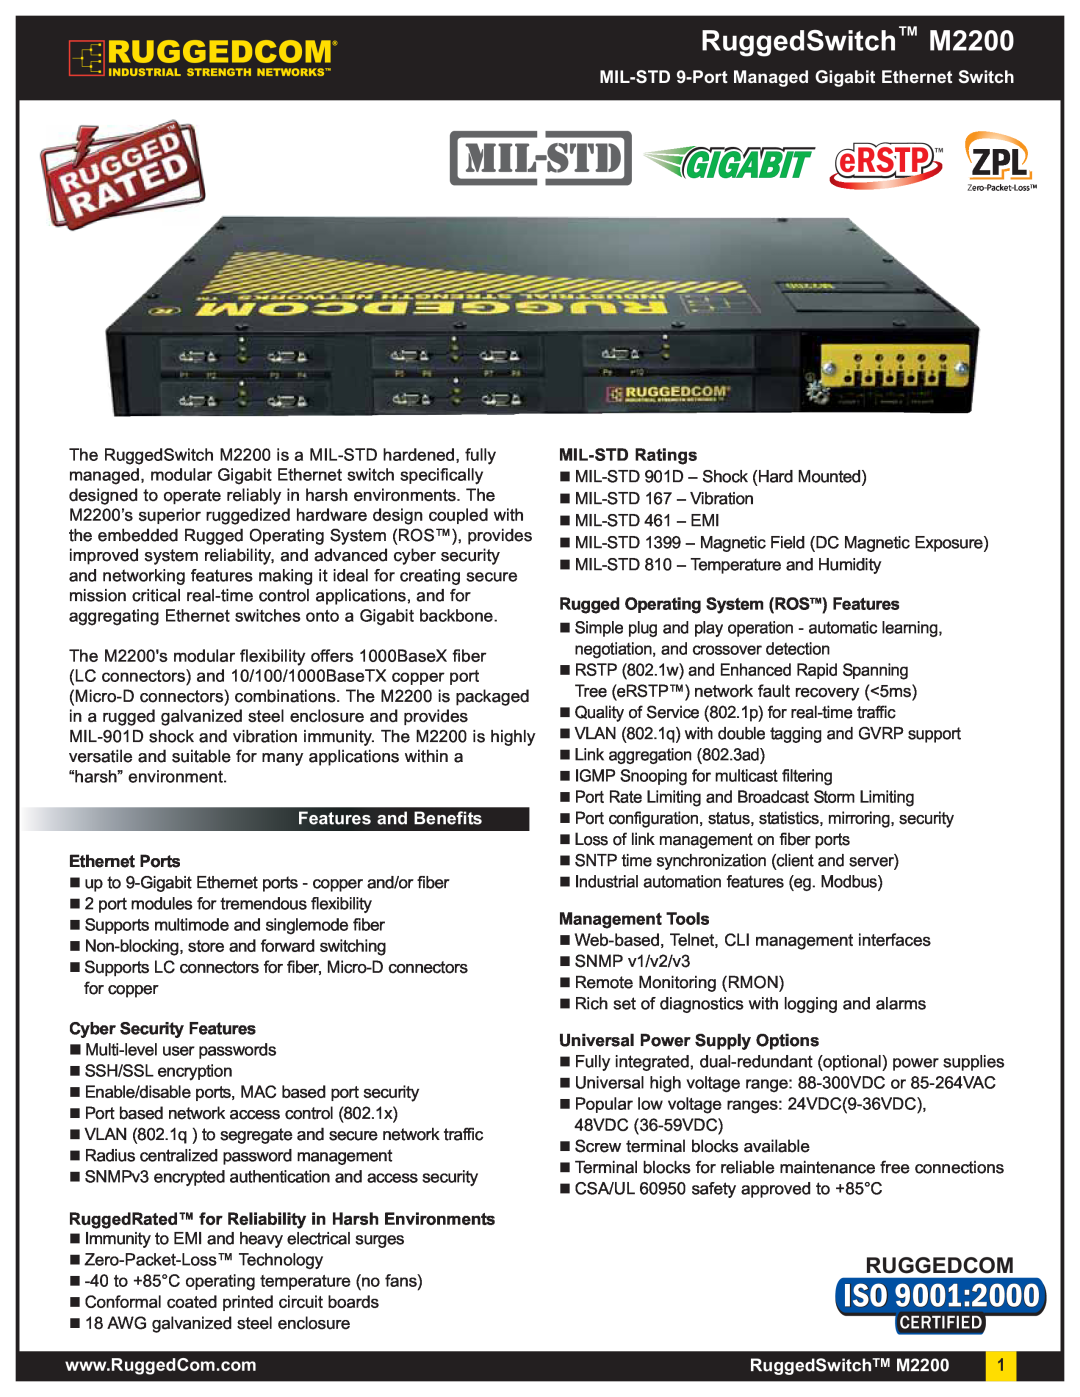 RuggedCom m2200 manual RuggedSwitch M2200, MIL-STD 9-Port Managed Gigabit Ethernet Switch, Features and Benefits 